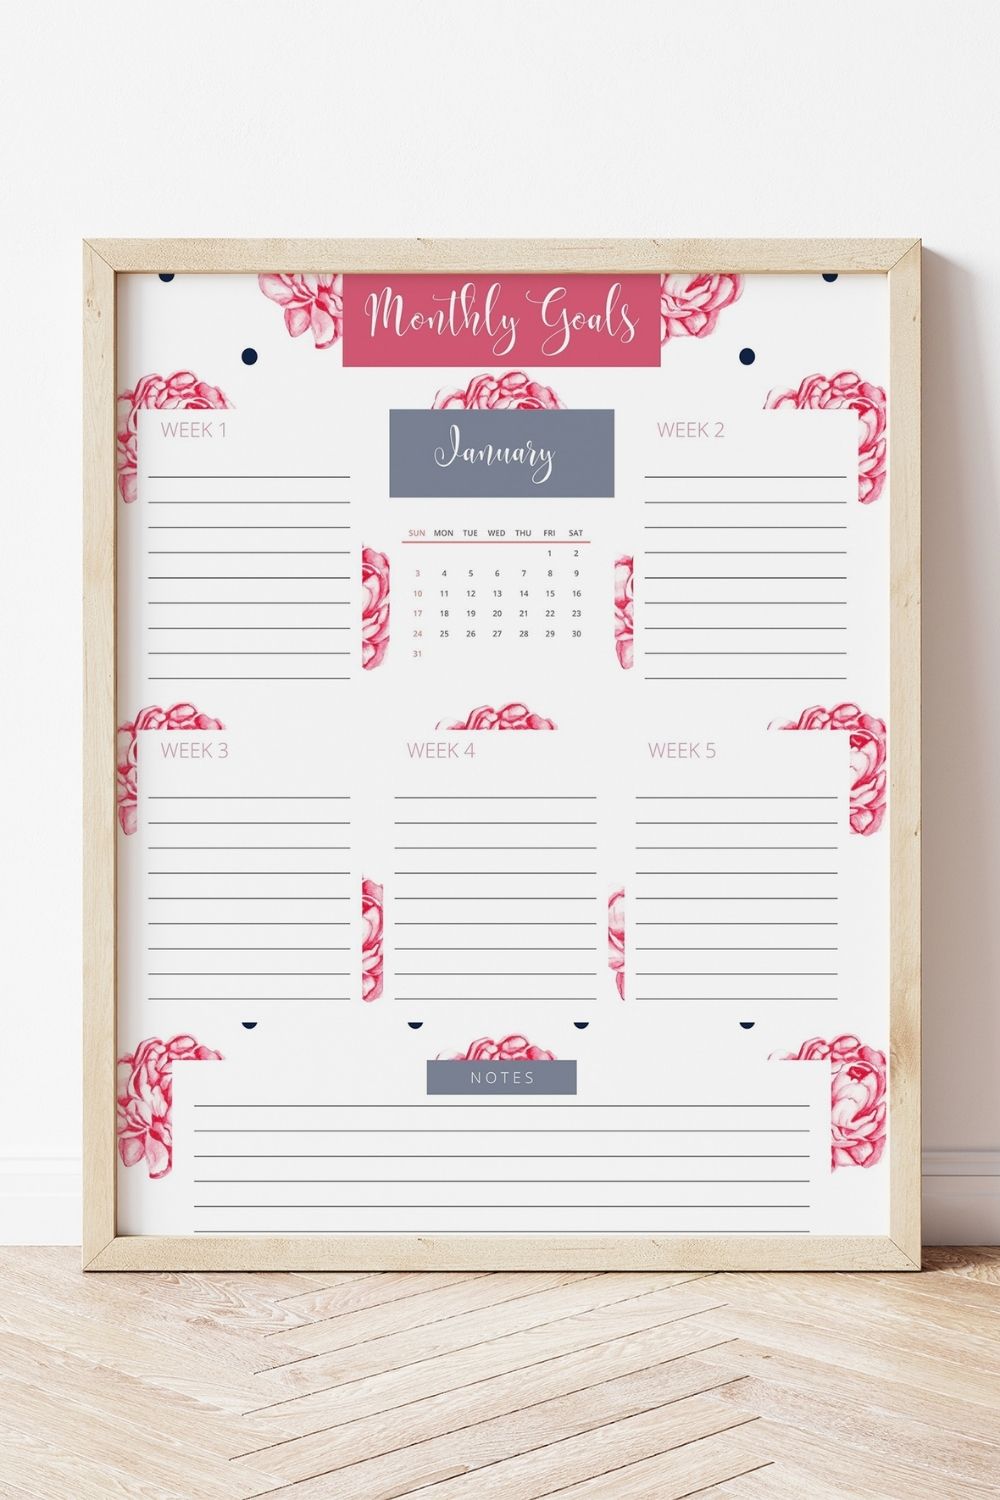 Monthly Goals Page in a Free Printable 2021 Planner Pack